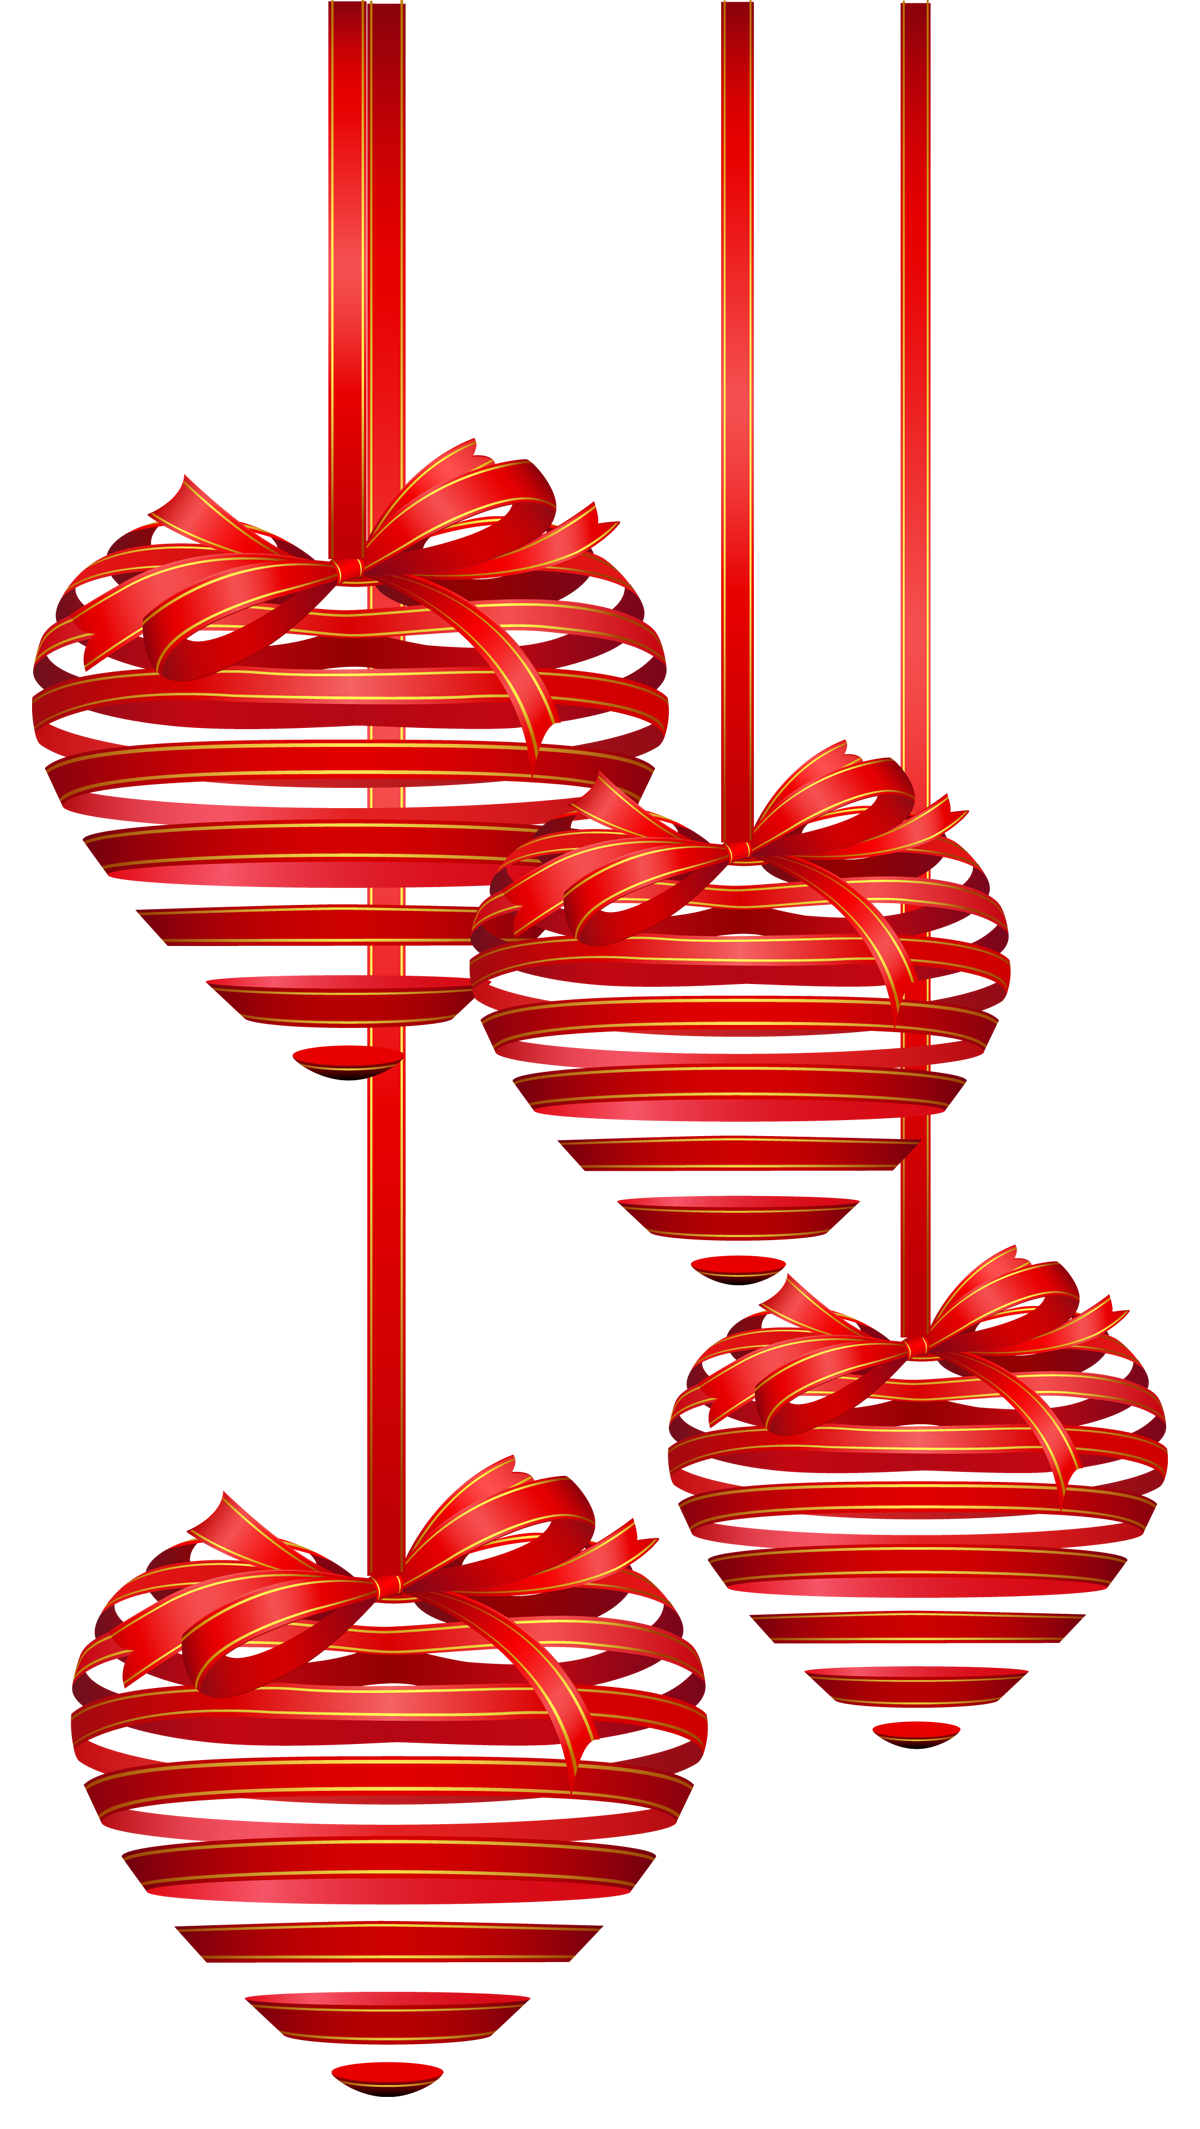 Island clipart beautiful island. Red hearts ornaments png